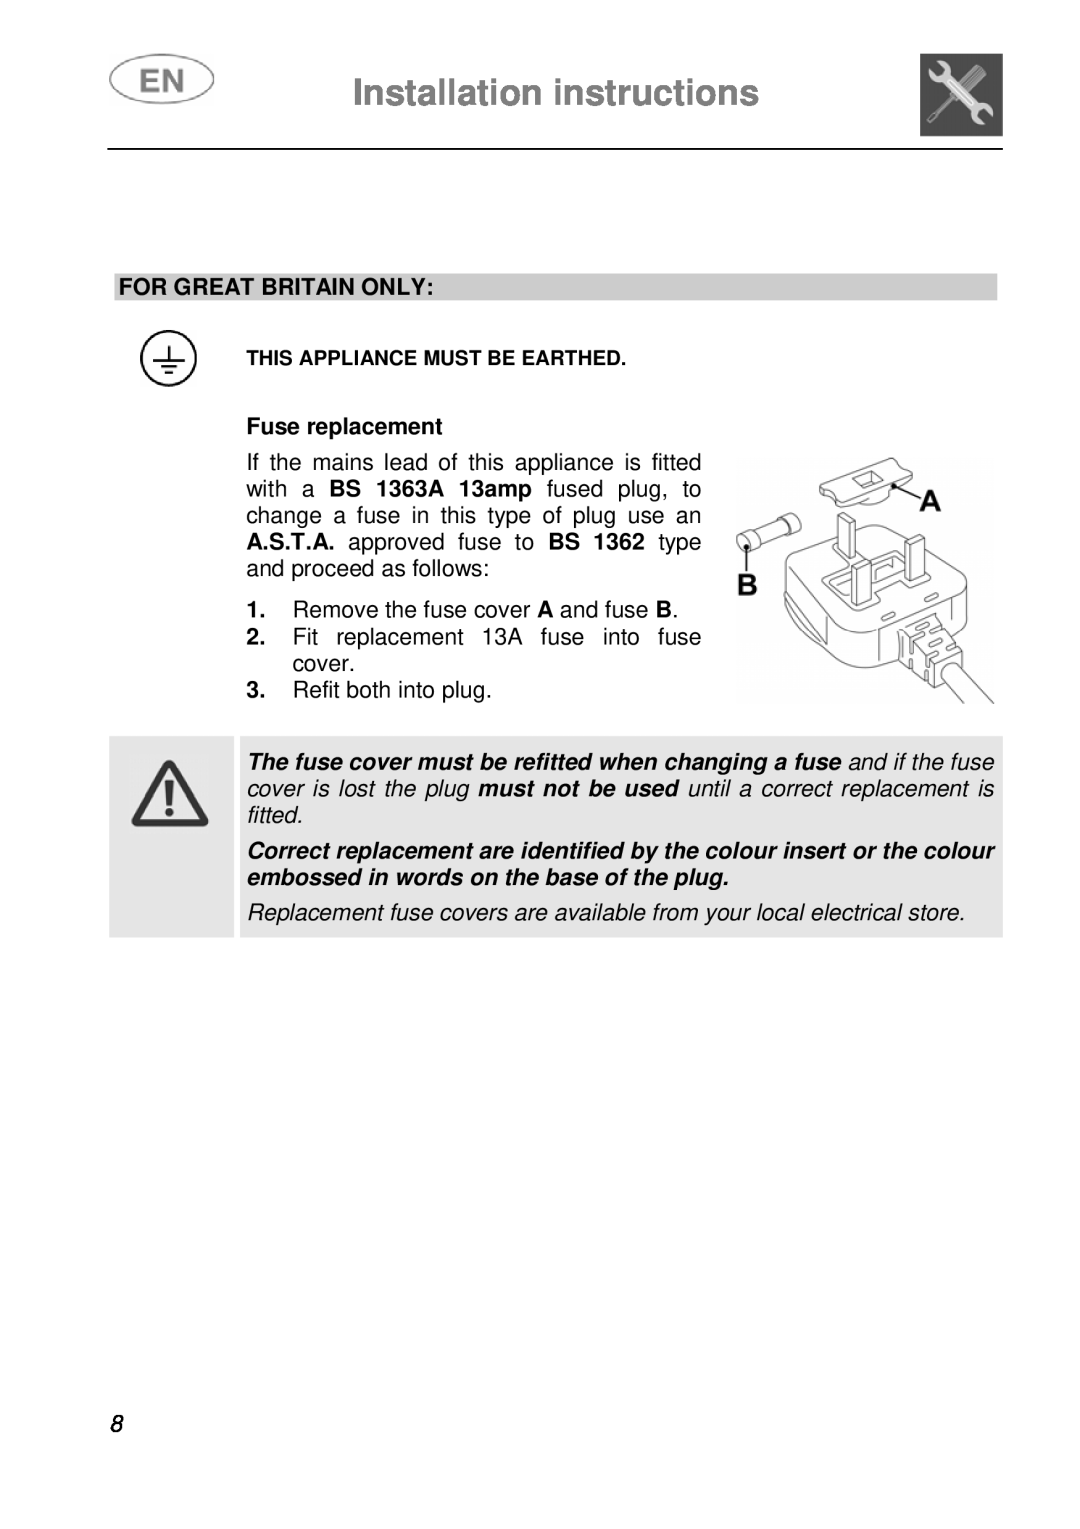 Smeg STA6249, STA6248 instruction manual Installation instructions, For Great Britain Only, Fuse replacement 